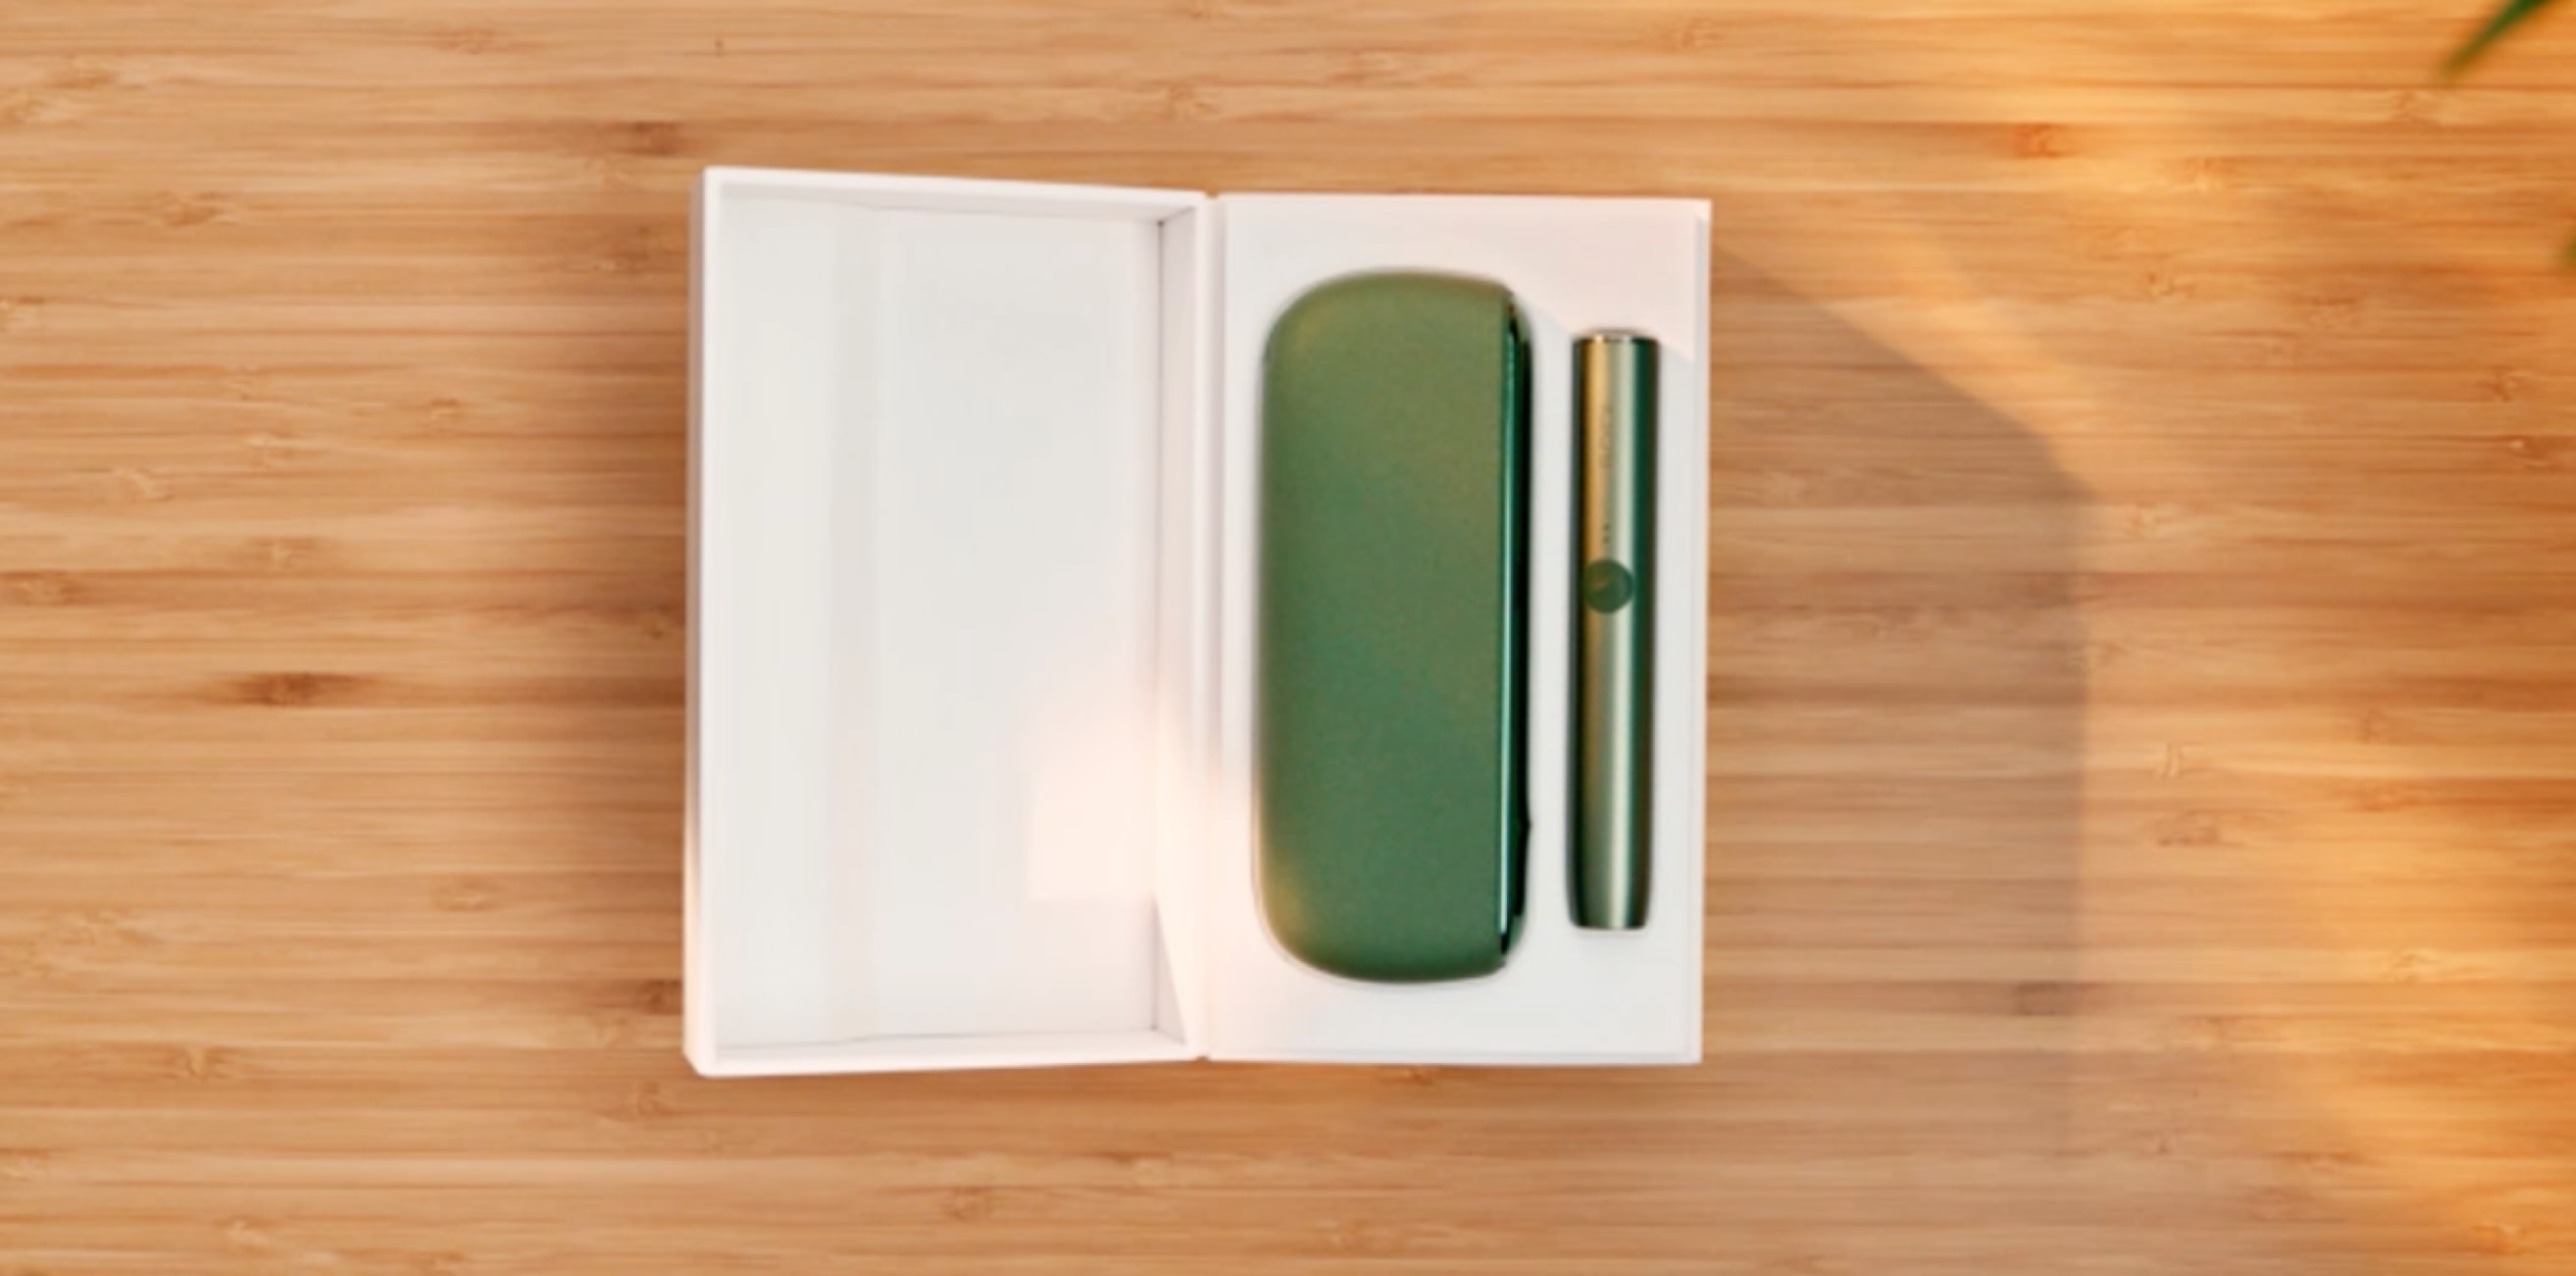 A Moss Green IQOS ILUMA holder and Pocket Charger in a box.